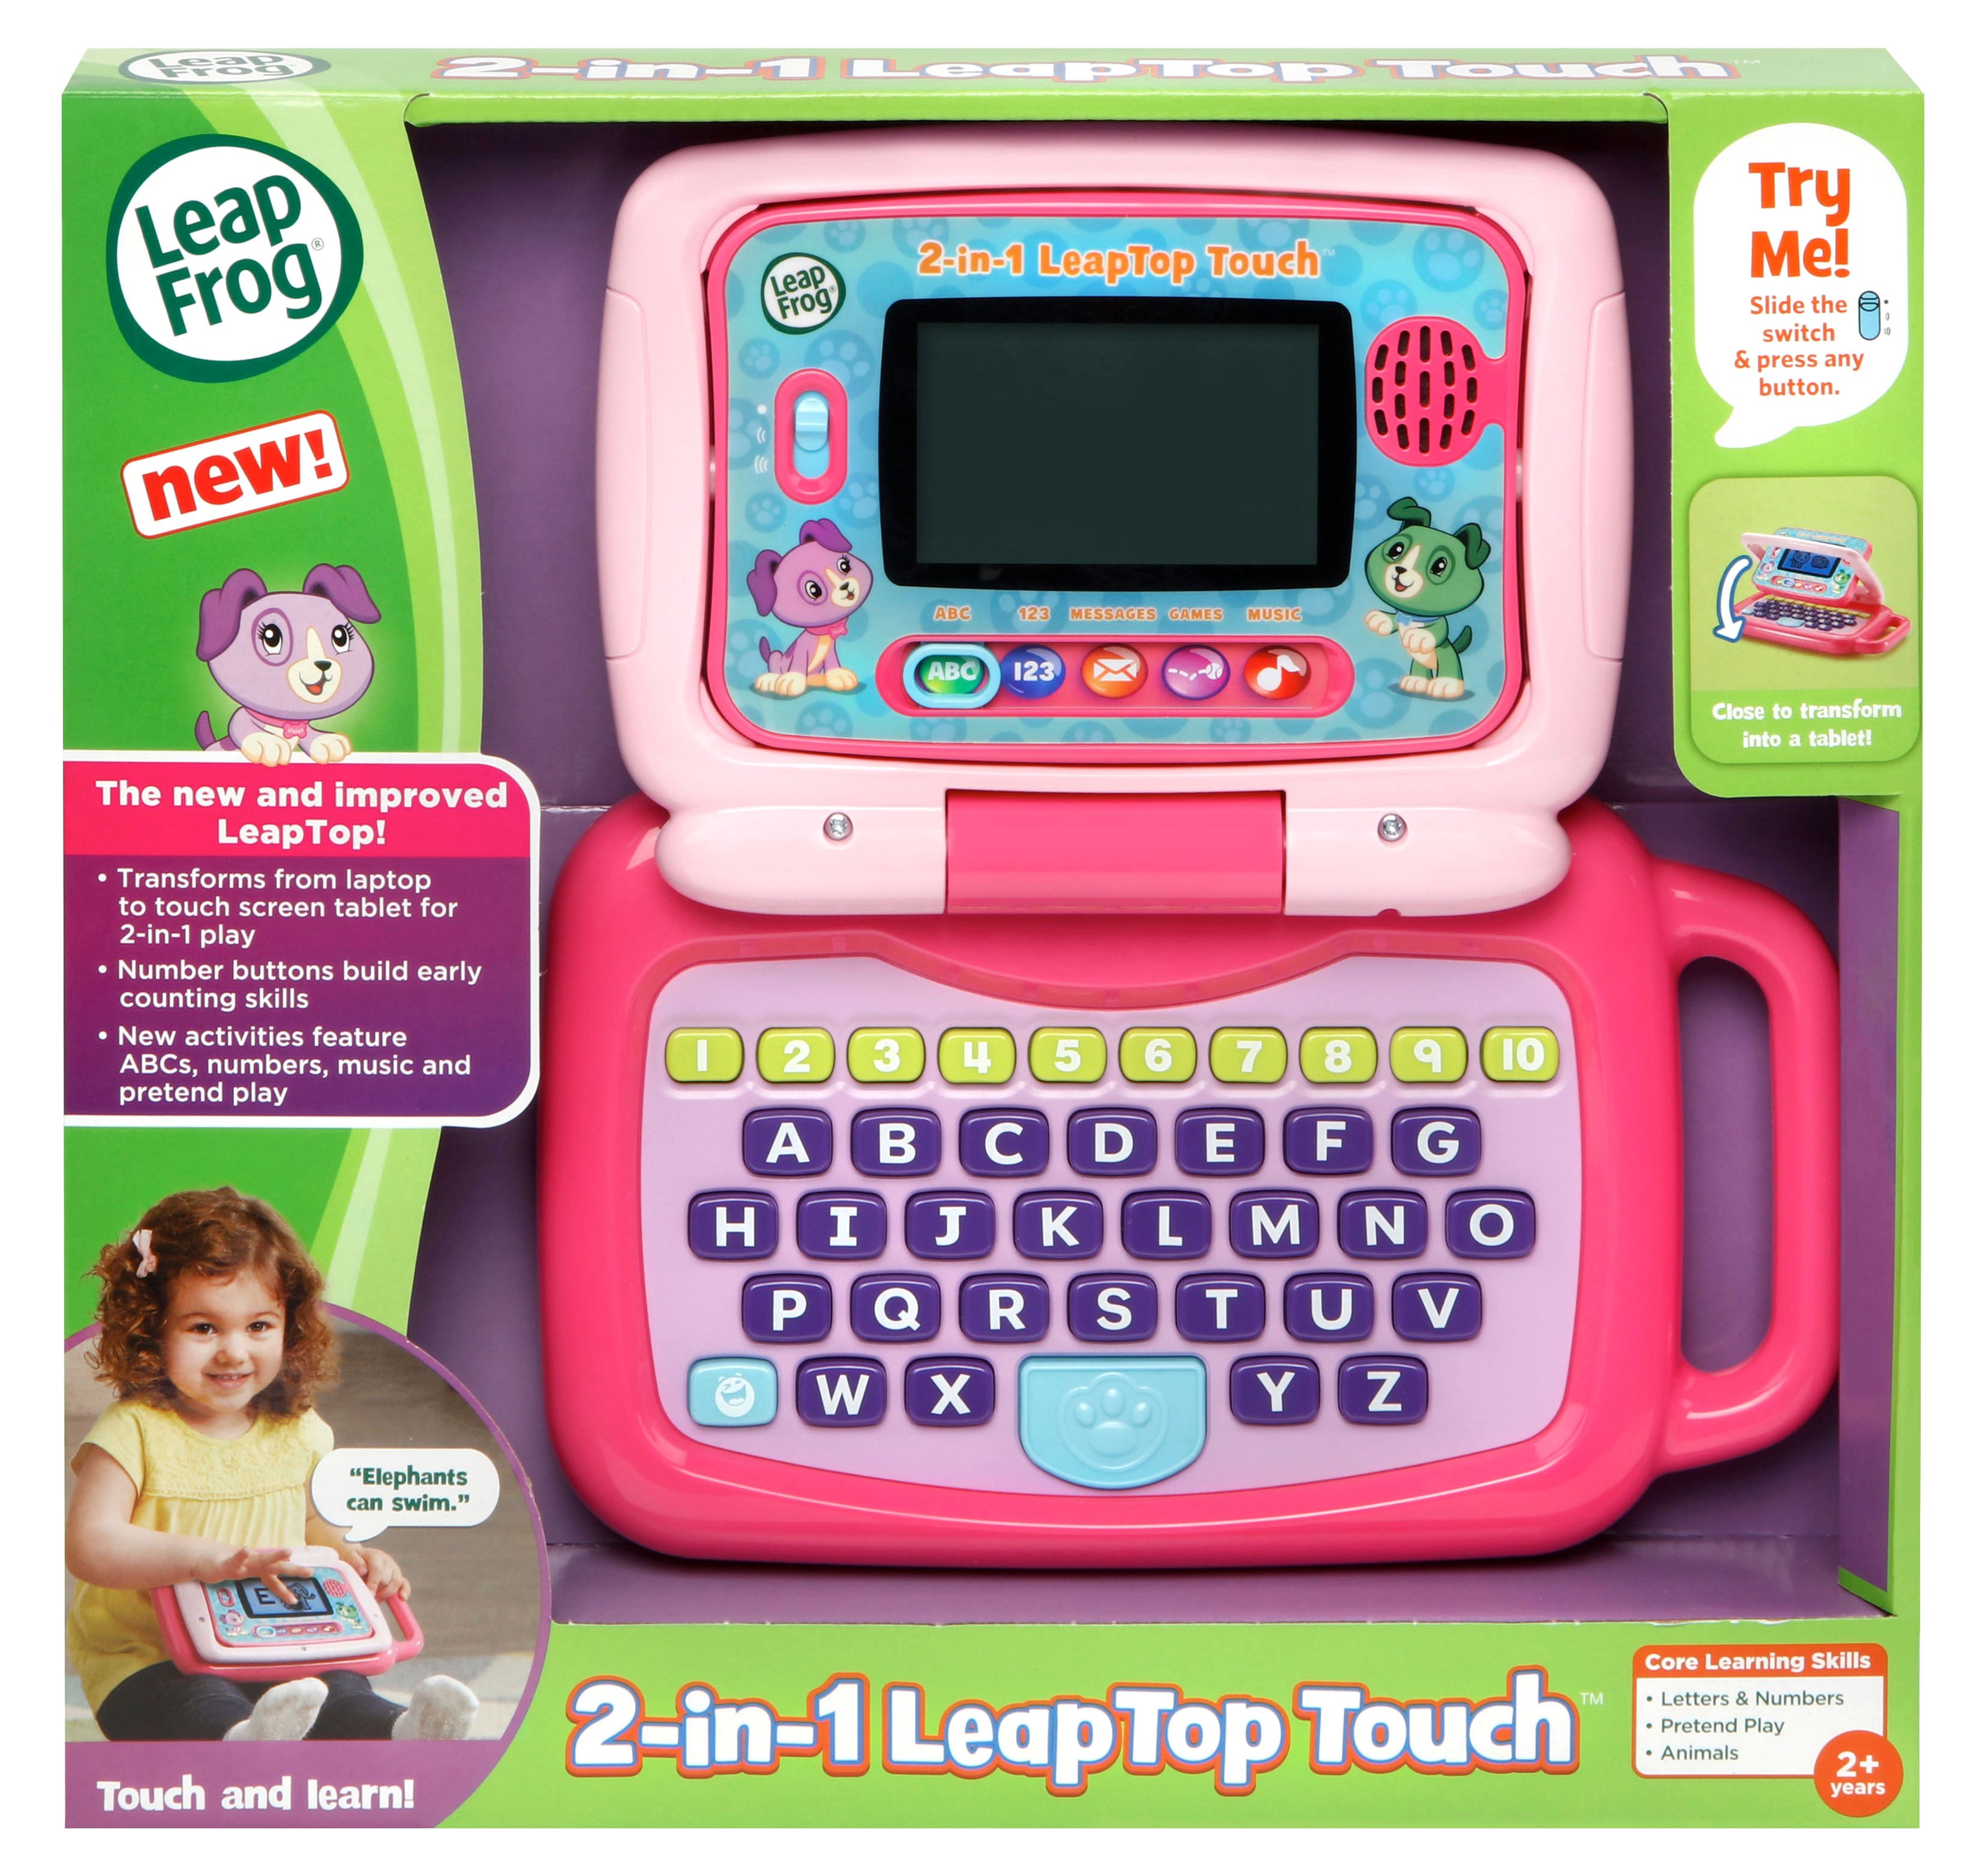 LeapFrog 2-in-1 LeapTop Touch for Toddlers, Electronic Learning System, Teaches Letters, Numbers - image 12 of 12